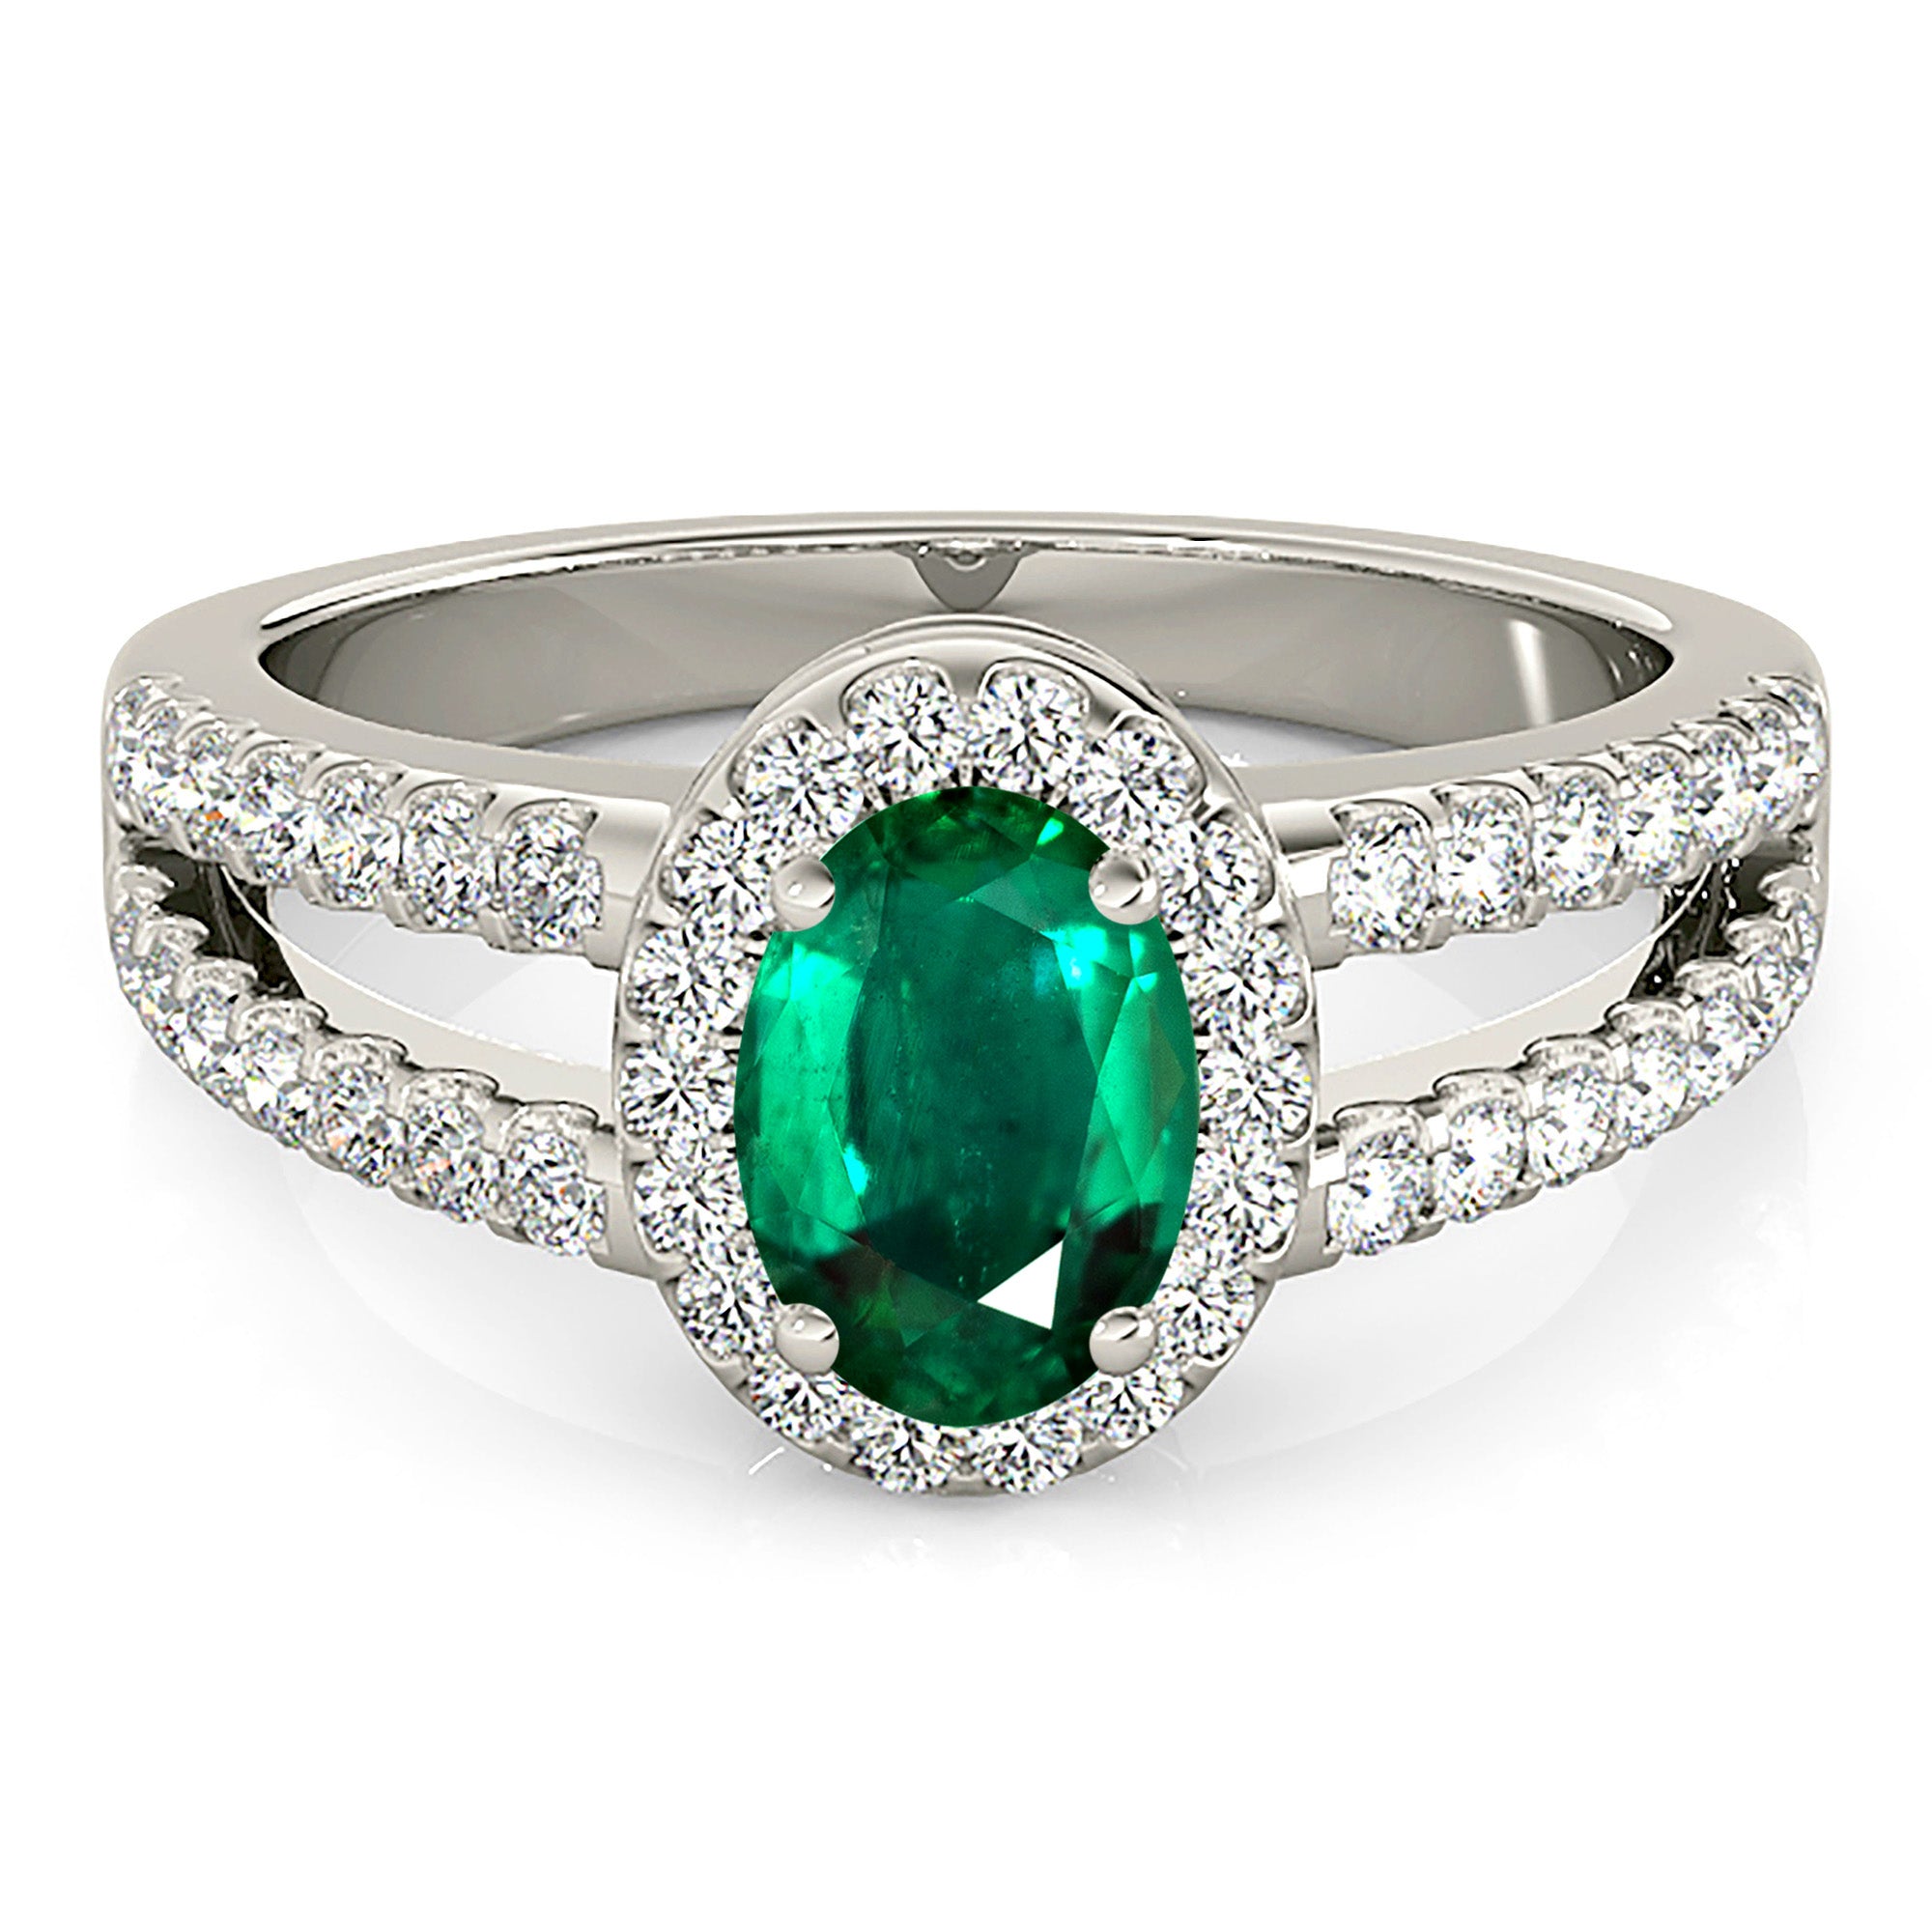 2.00 ct. Genuine Oval Emerald Ring With 0.50 ctw. Diamond Halo and Diamond Split Shank-in 14K/18K White, Yellow, Rose Gold and Platinum - Christmas Jewelry Gift -VIRABYANI